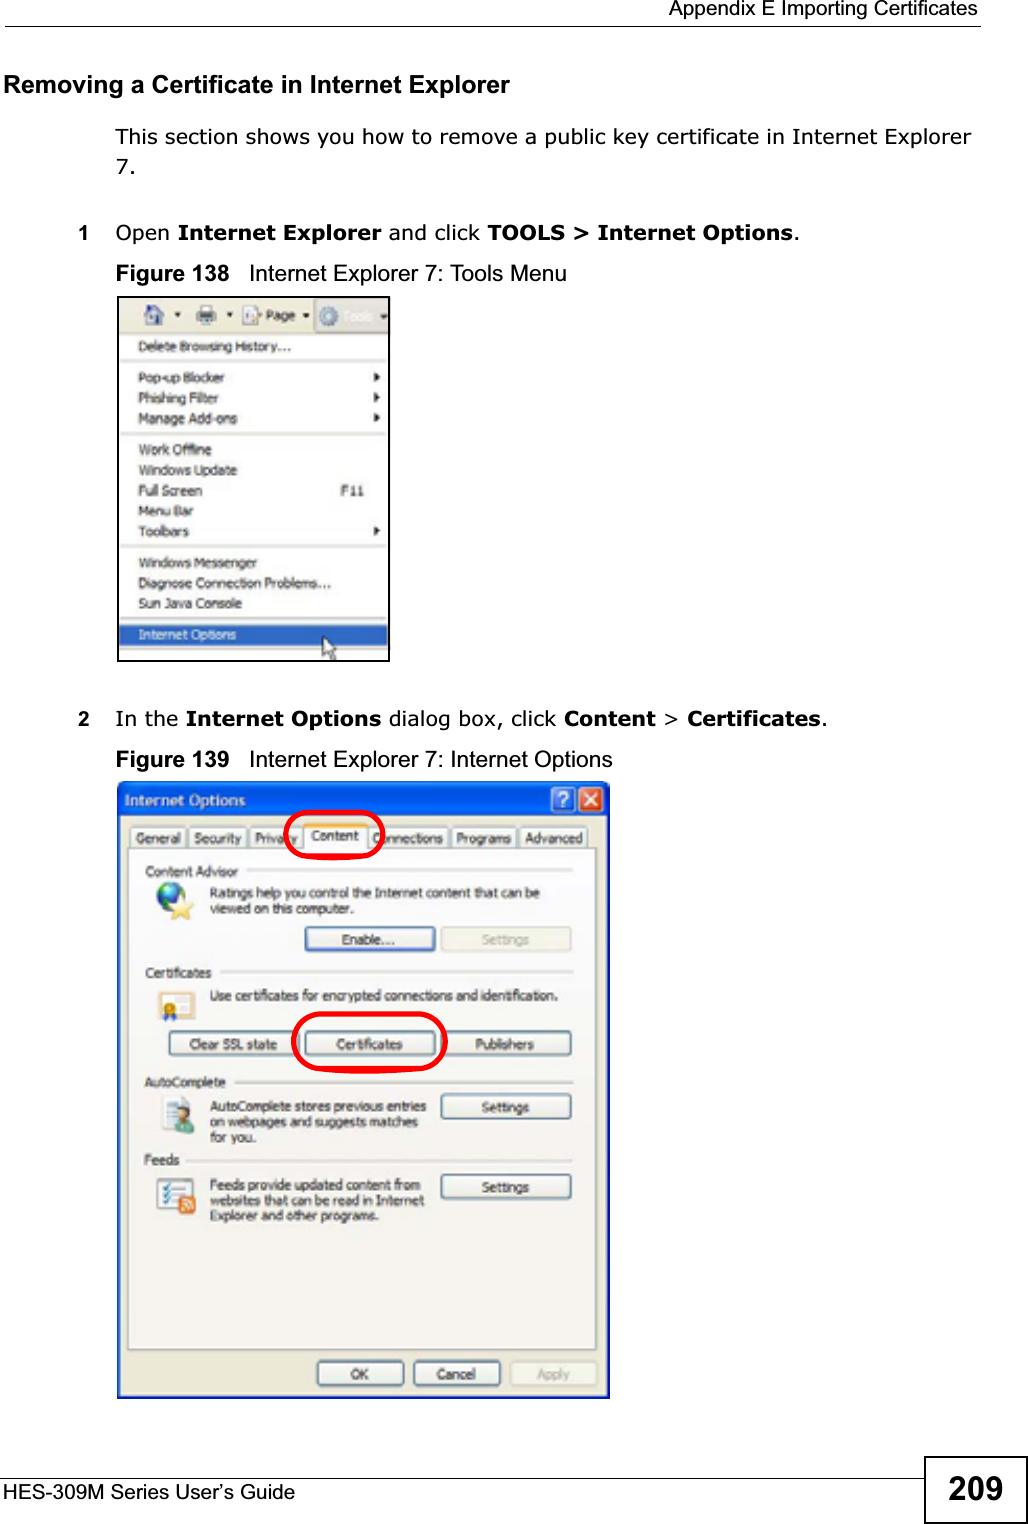  Appendix E Importing CertificatesHES-309M Series User’s Guide 209Removing a Certificate in Internet ExplorerThis section shows you how to remove a public key certificate in Internet Explorer 7.1Open Internet Explorer and click TOOLS &gt; Internet Options.Figure 138   Internet Explorer 7: Tools Menu2In the Internet Options dialog box, click Content &gt;Certificates.Figure 139   Internet Explorer 7: Internet Options